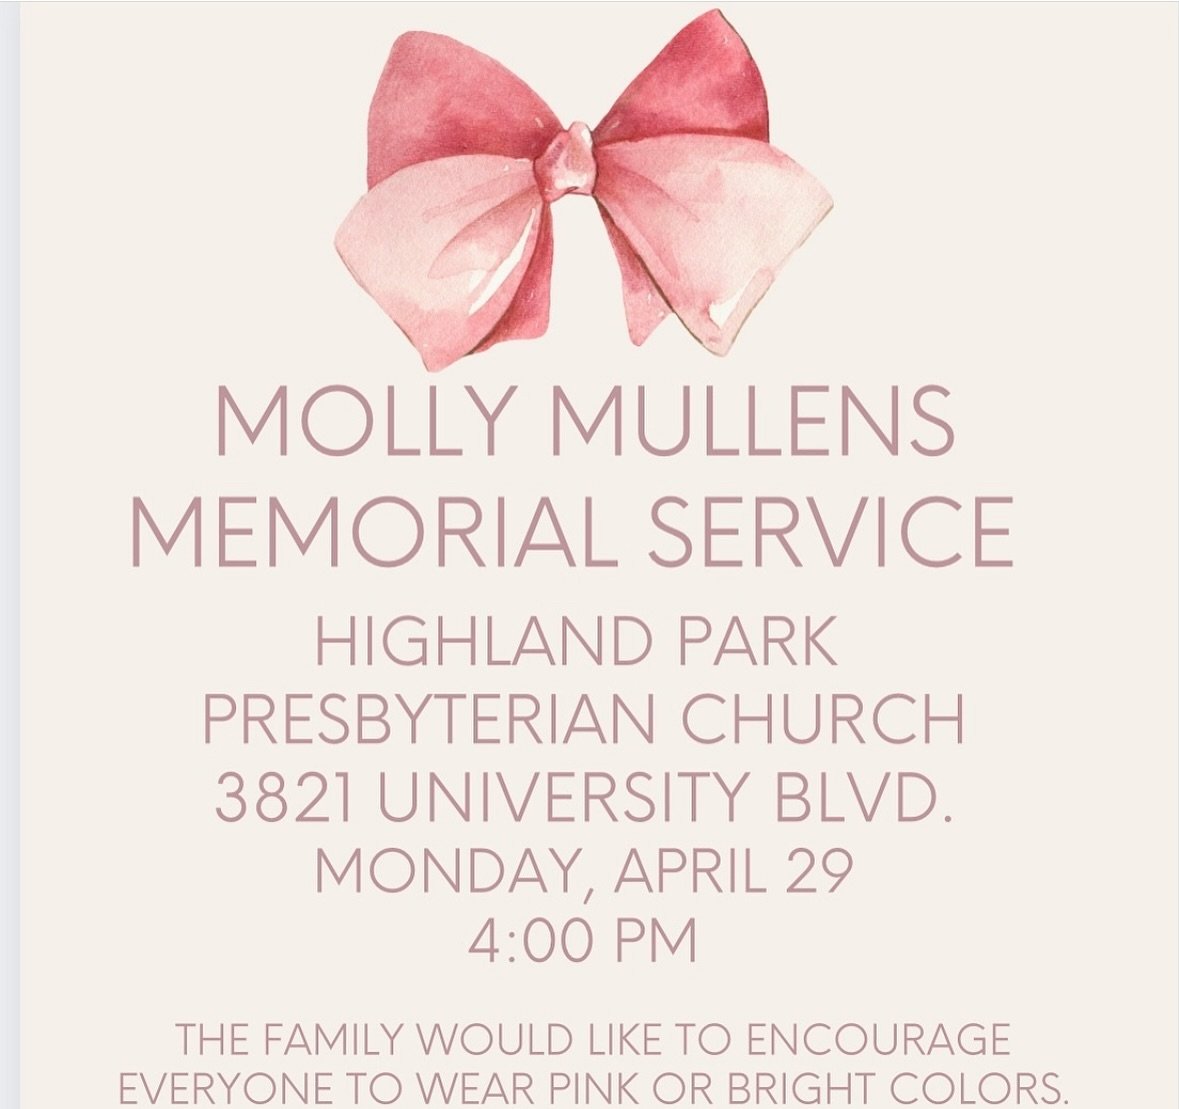 Please join The Mullens Family for a Memorial Service to honor their precious daughter, Molly. The family would like to encourage everyone to wear pink or bright colors.🎀🎀🎀